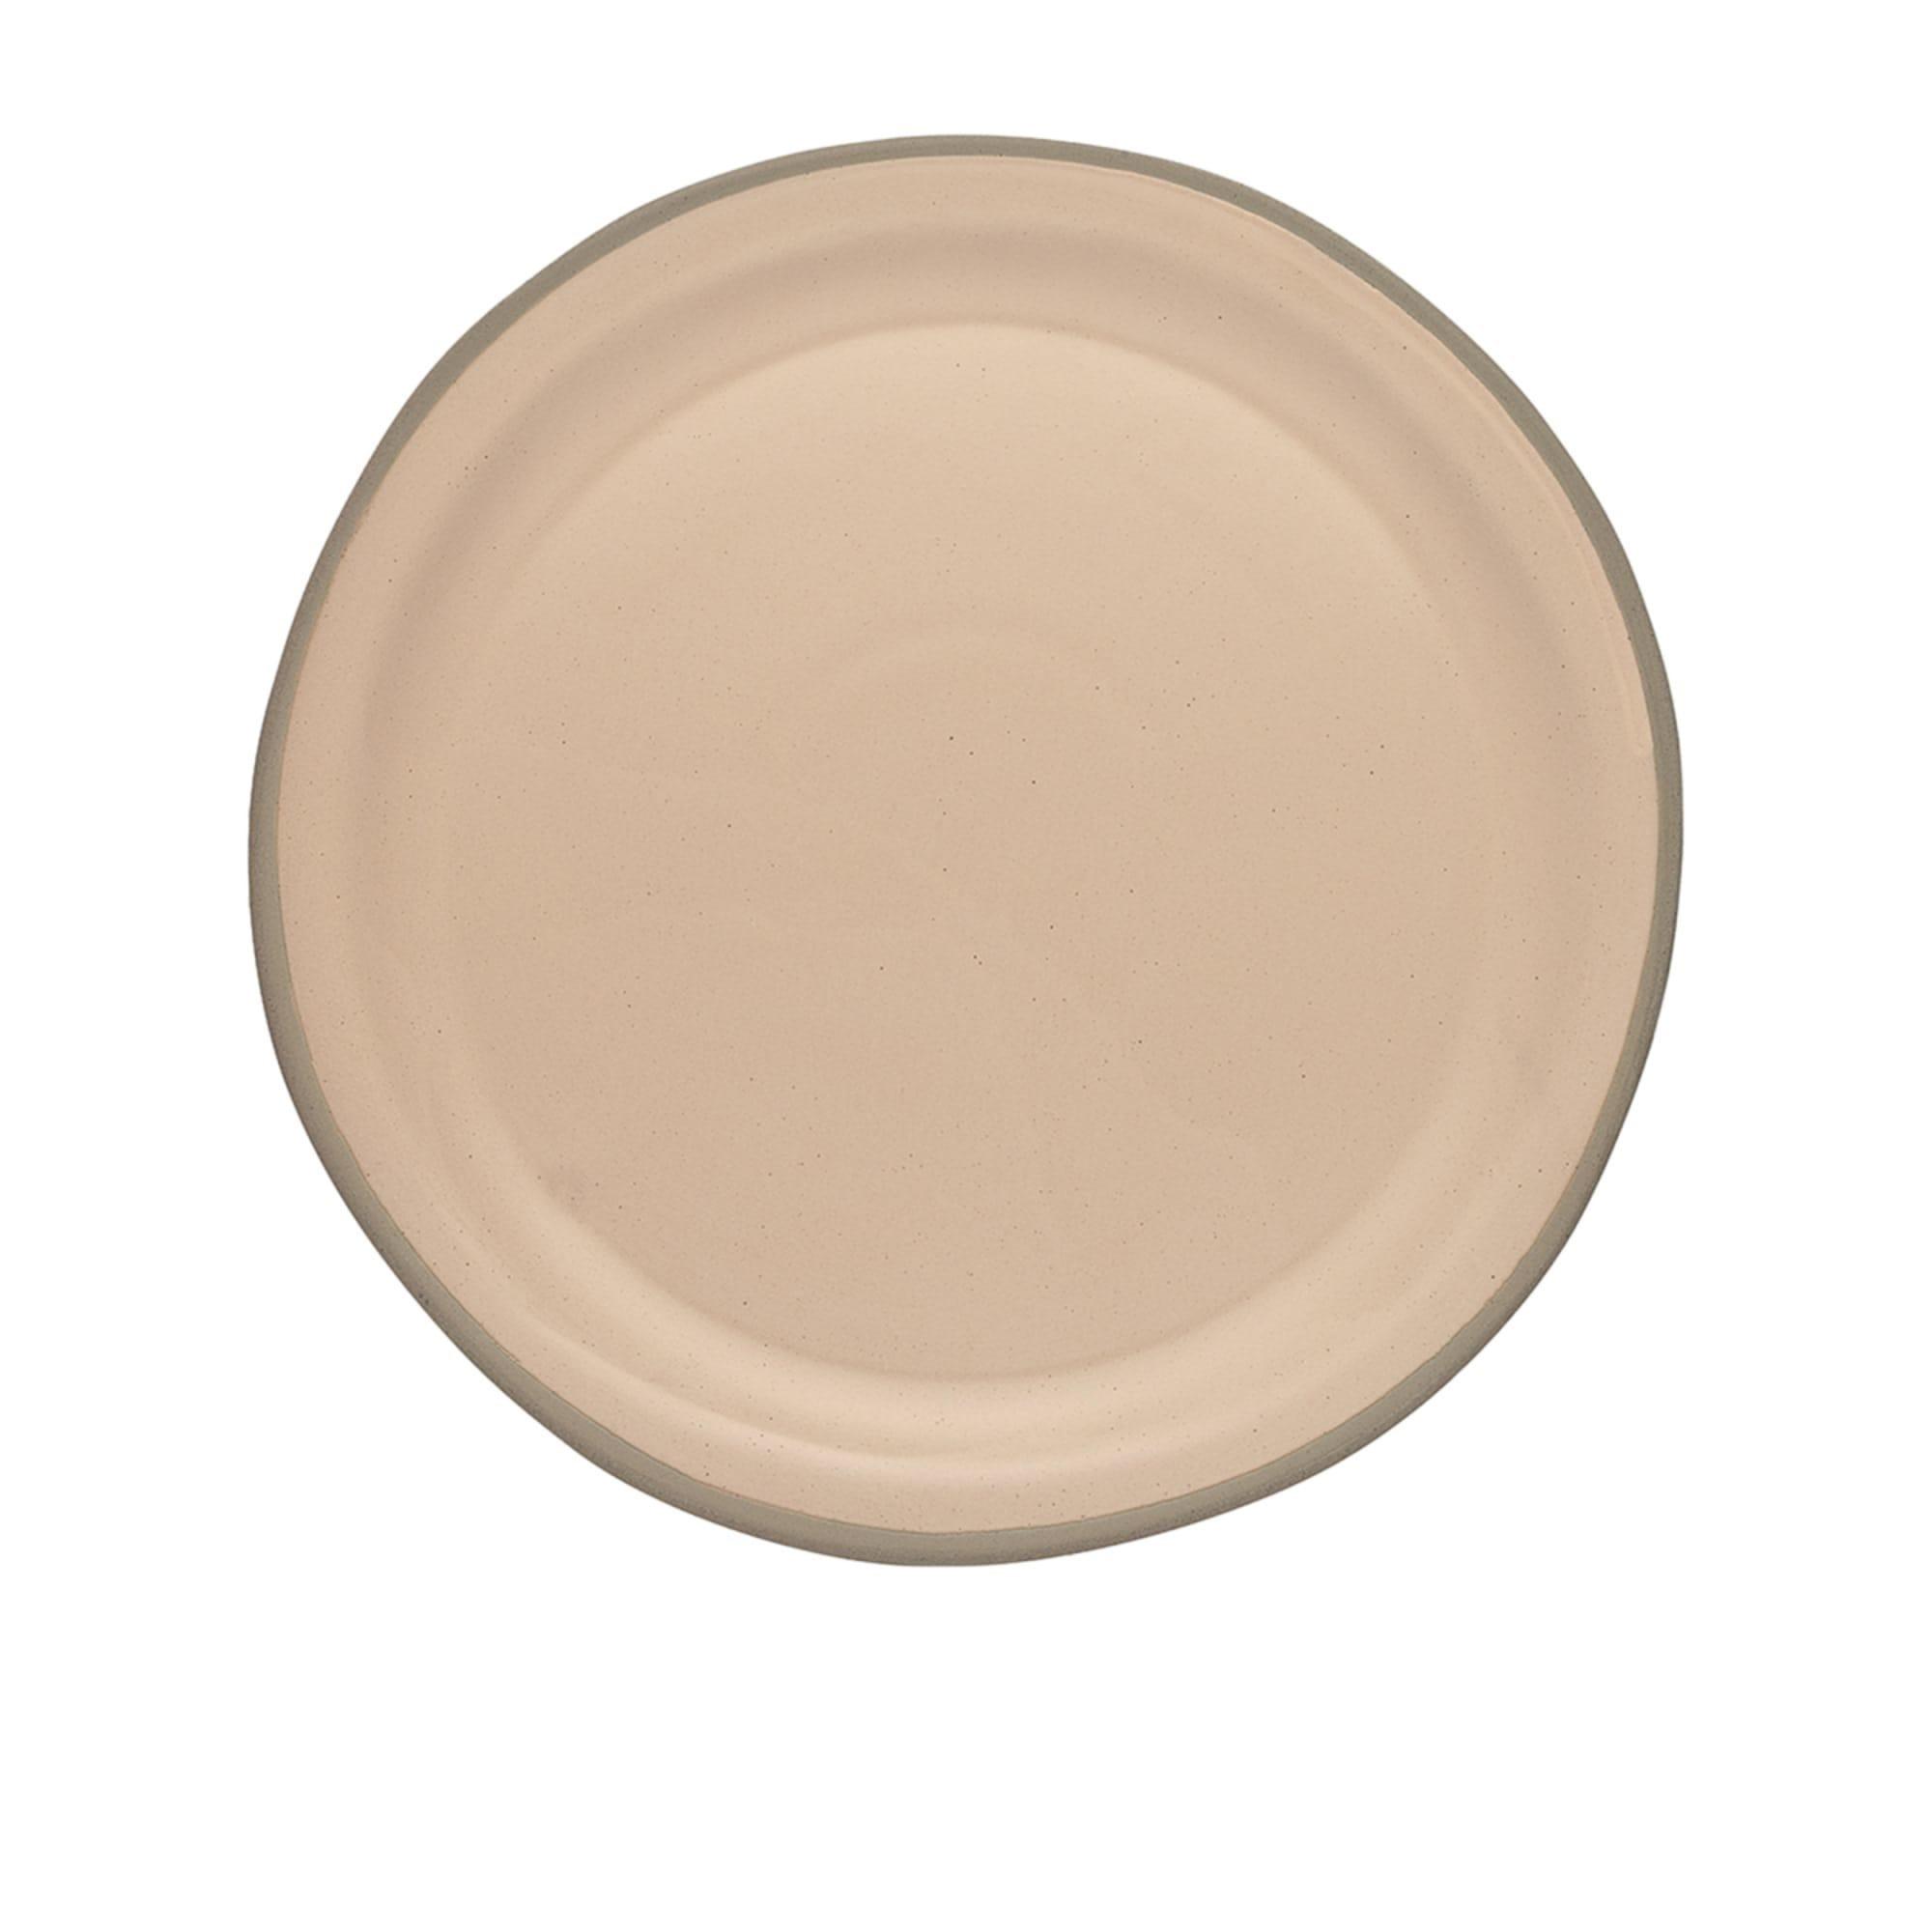 Ecology Tahoe Dinner Plate Set of 4 Apricot Image 2